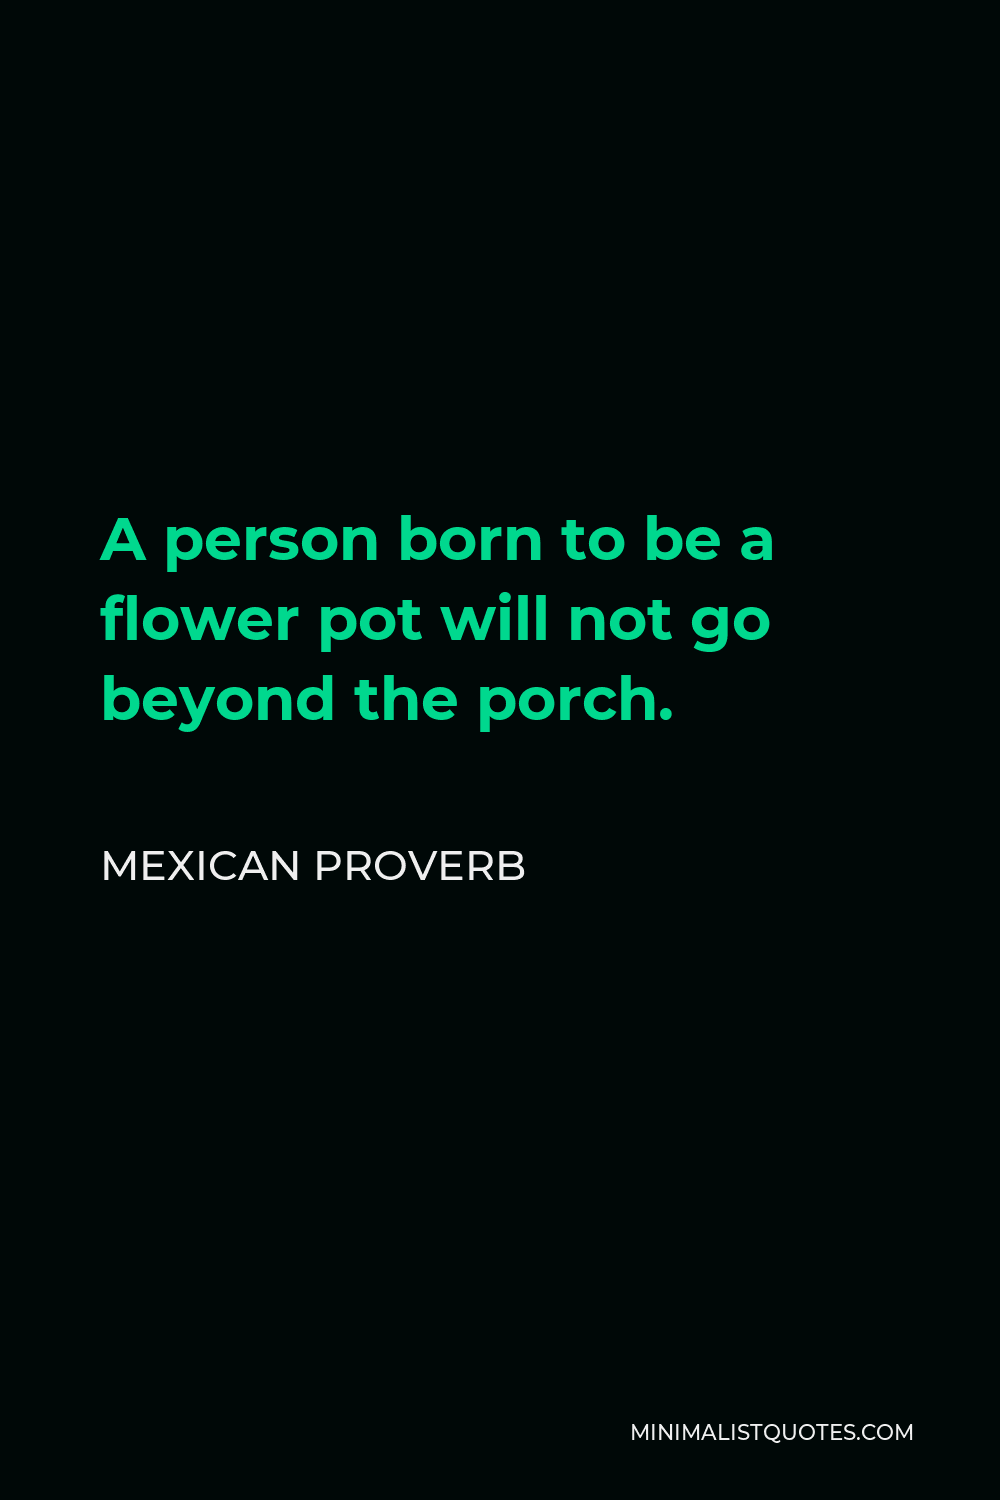 Mexican Proverb Quote - A person born to be a flower pot will not go beyond the porch.